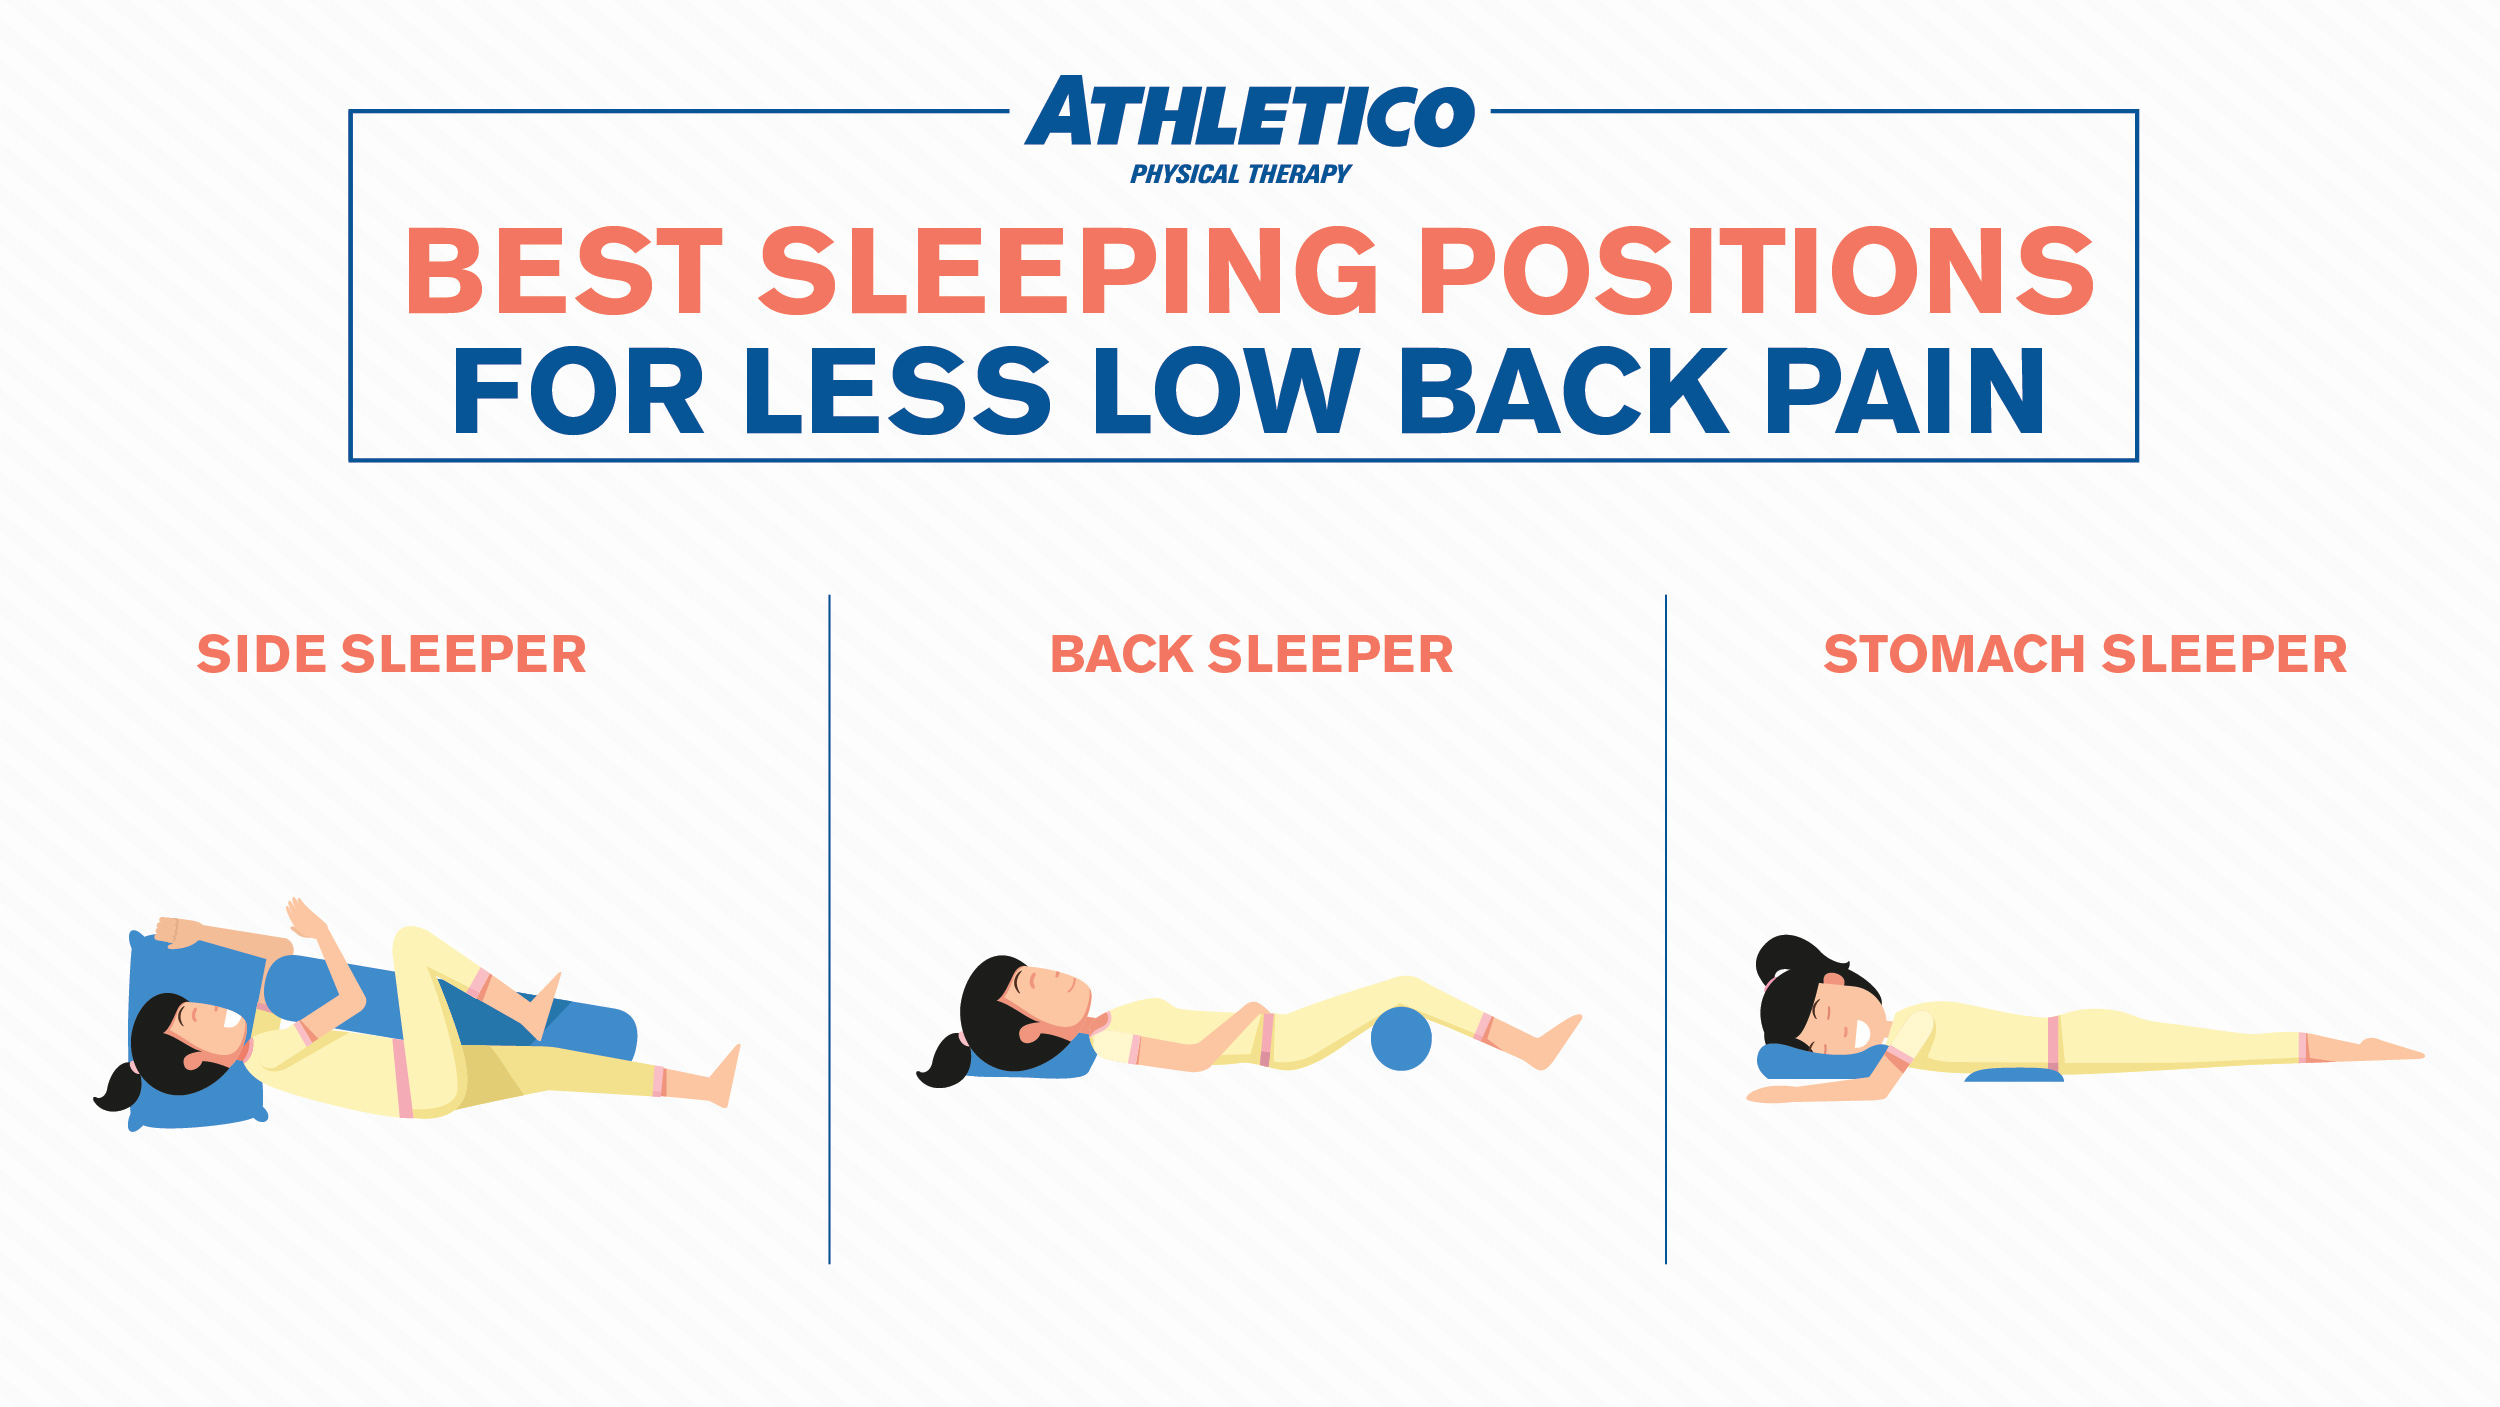 How to Sleep With Lower Back Pain: 4 Best Positions to Prevent Pain